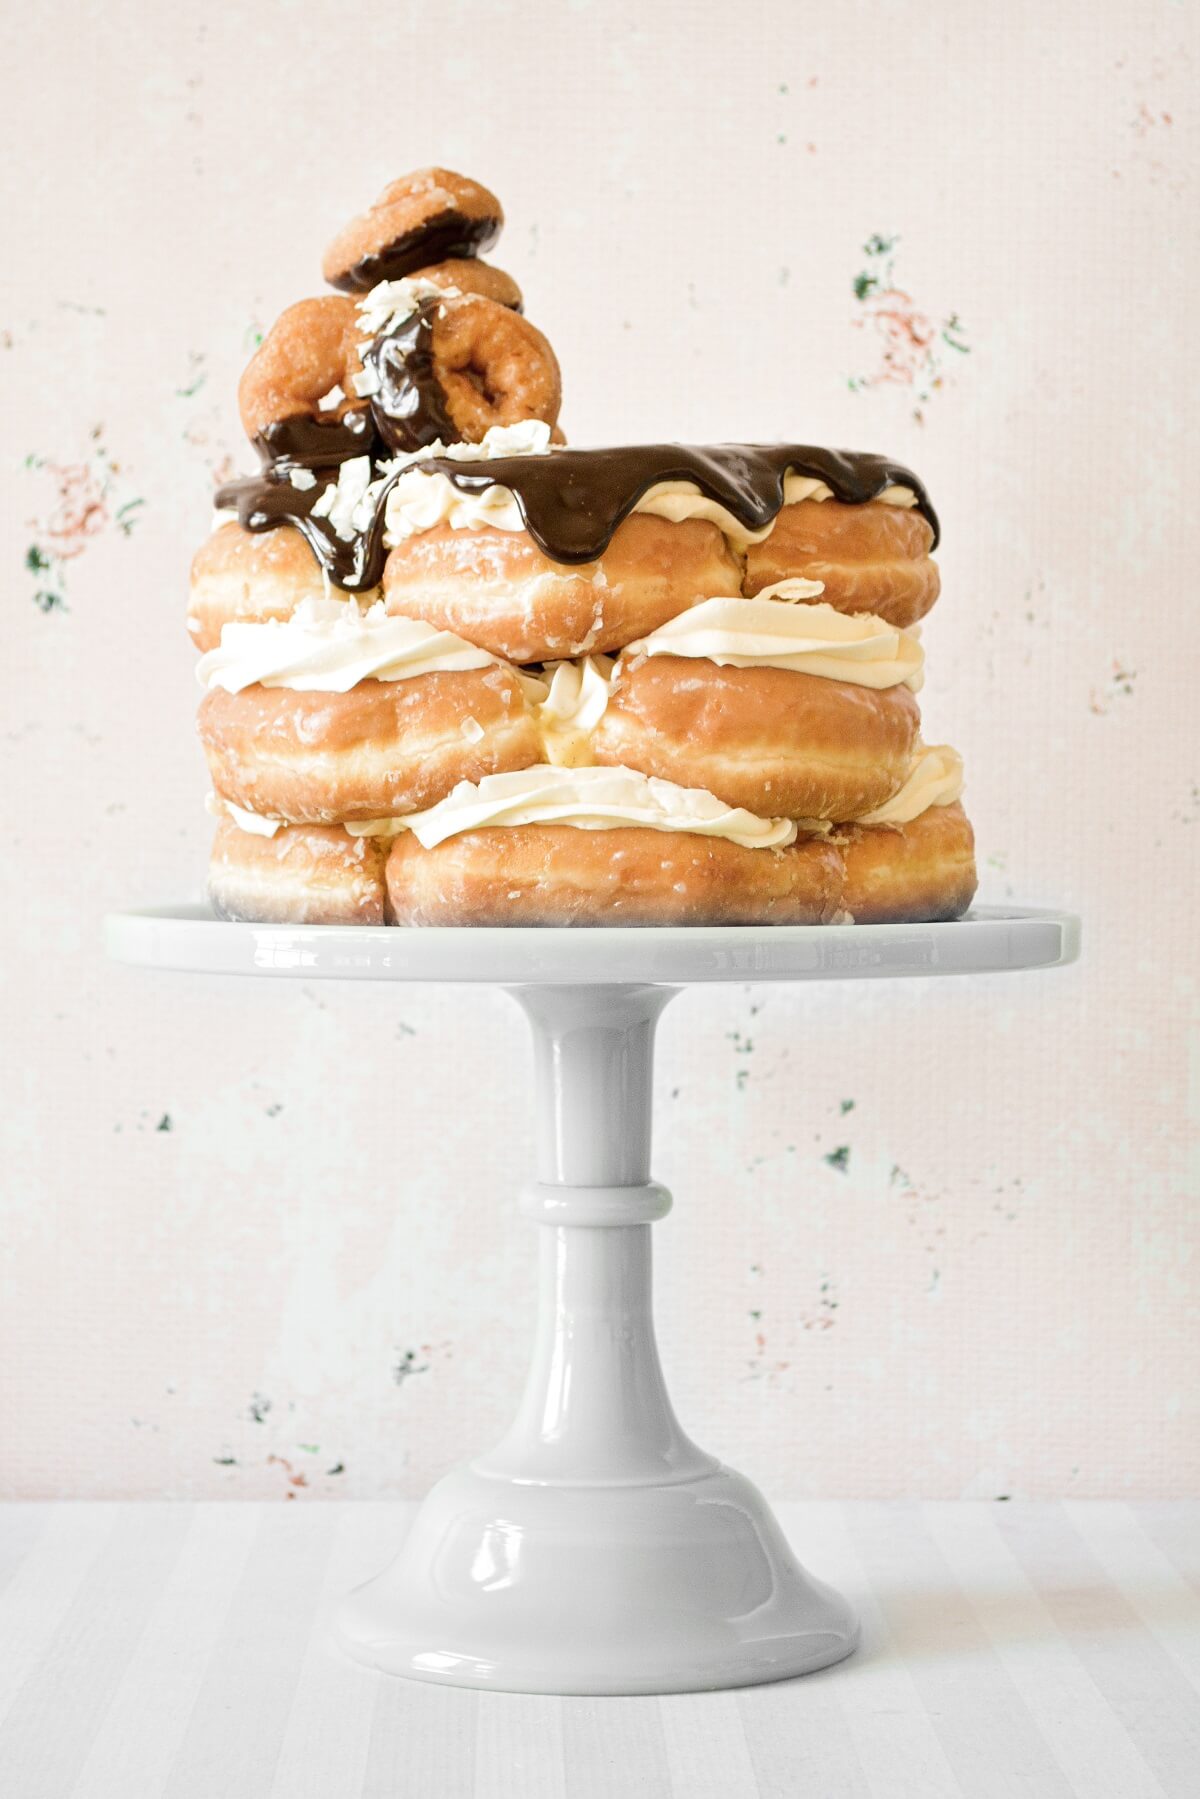 Doughnut cake, filled with custard, and topped with chocolate ganache.